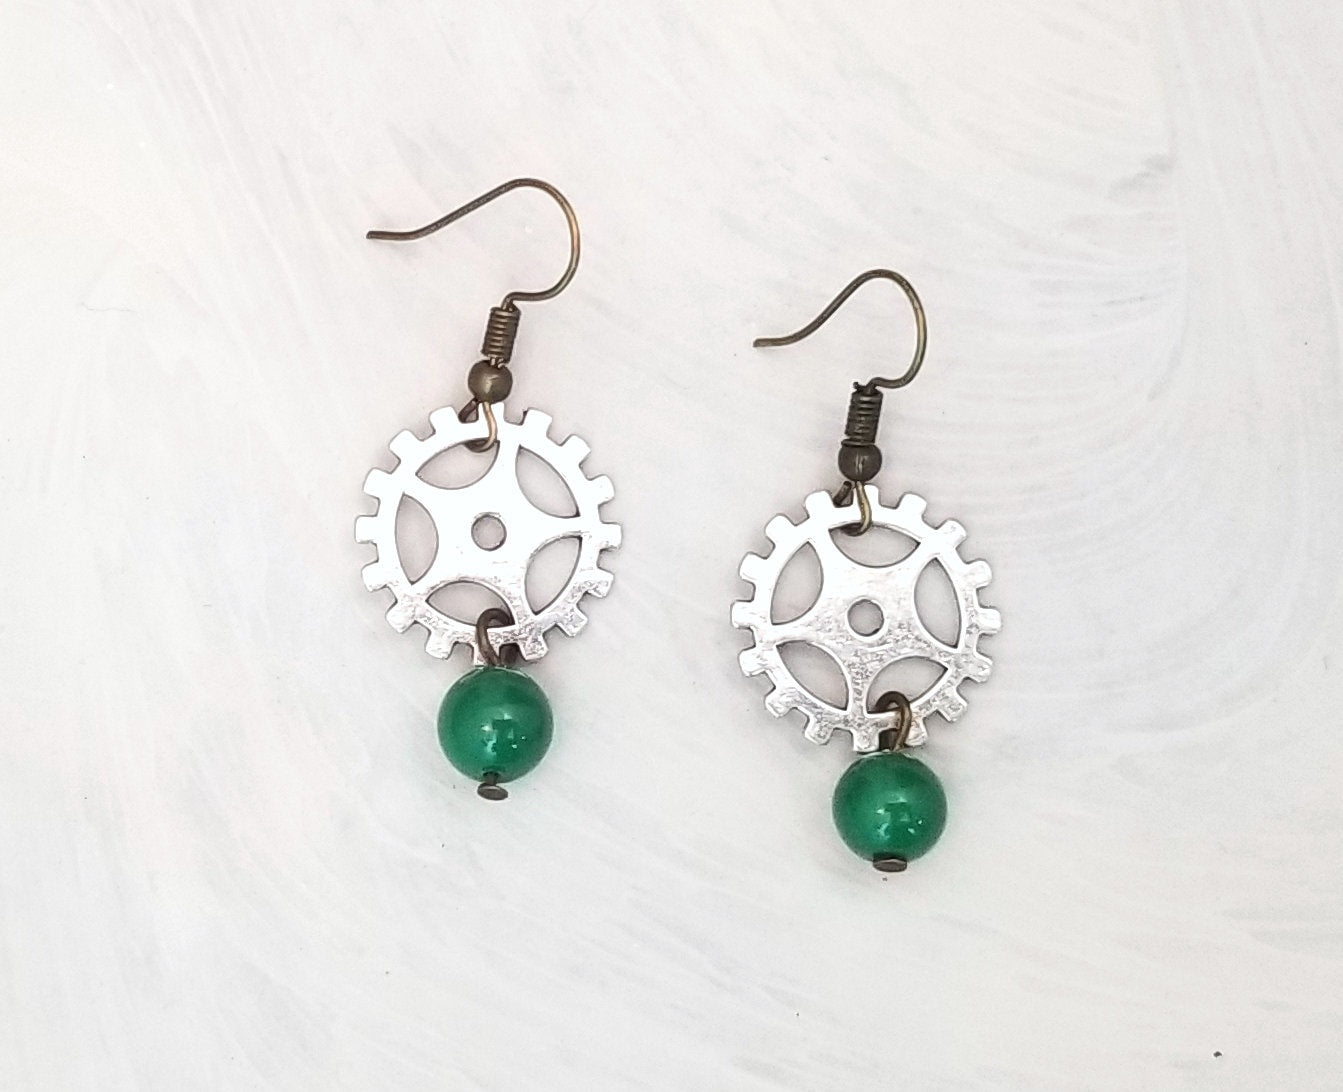 Steampunk Earrings with Gears Over Beads, Party, Wedding, Bridesmaid, Choice of Colors